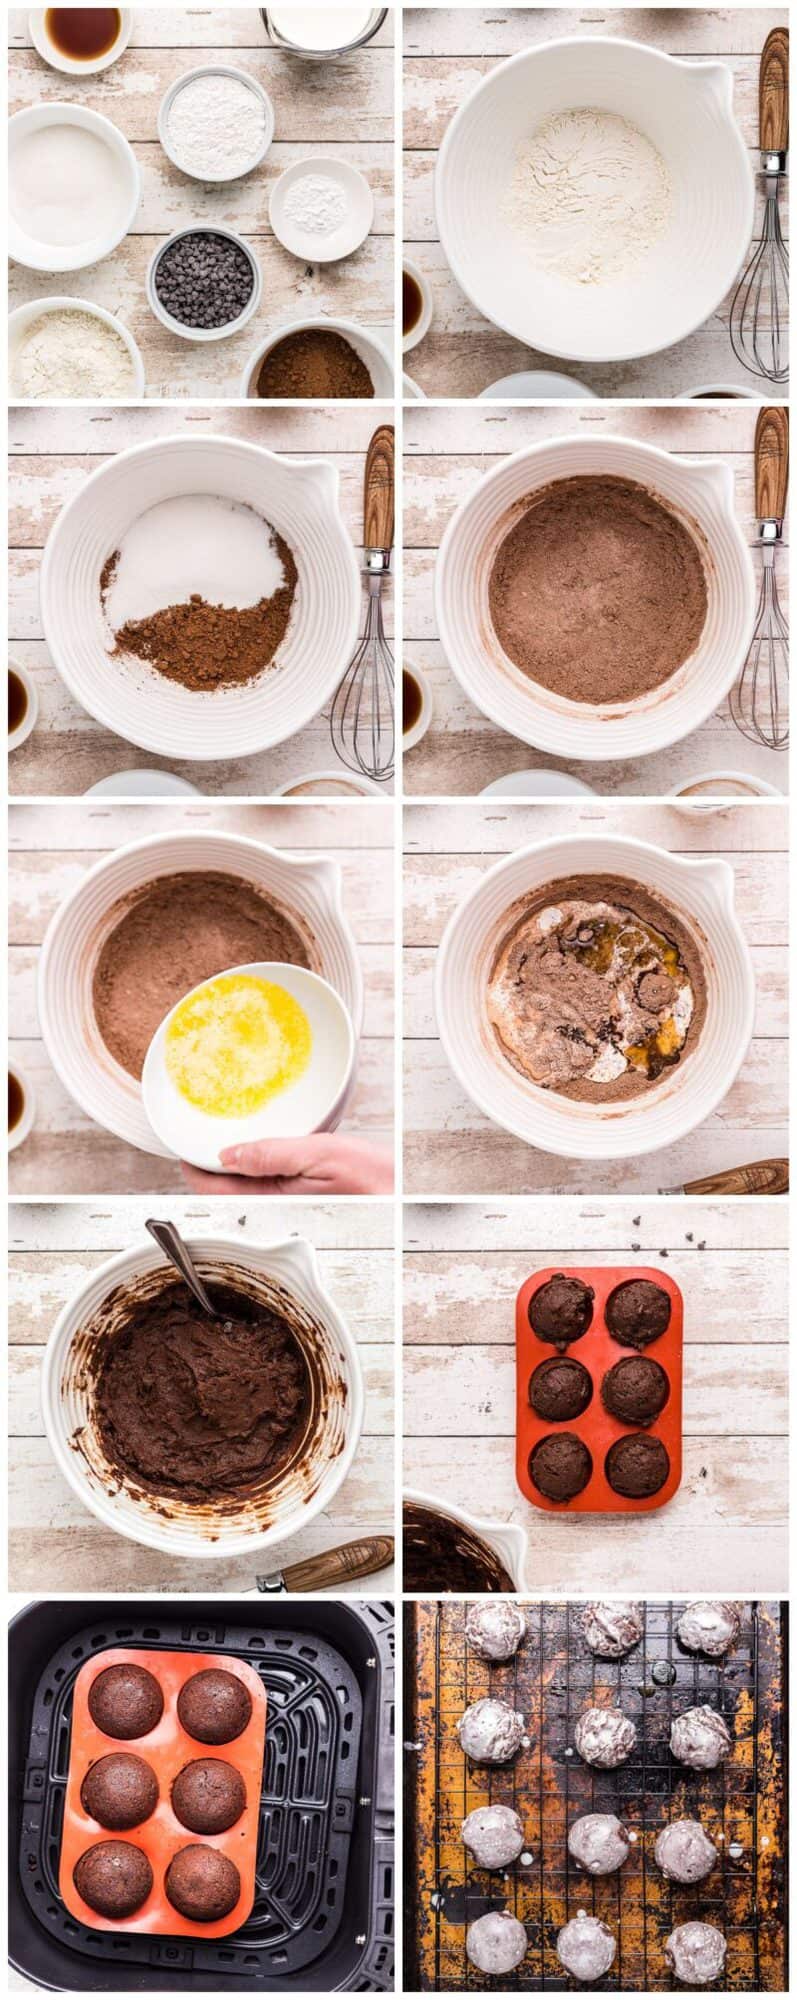 step by step photos for how to make chocolate donut holes in an air fryer